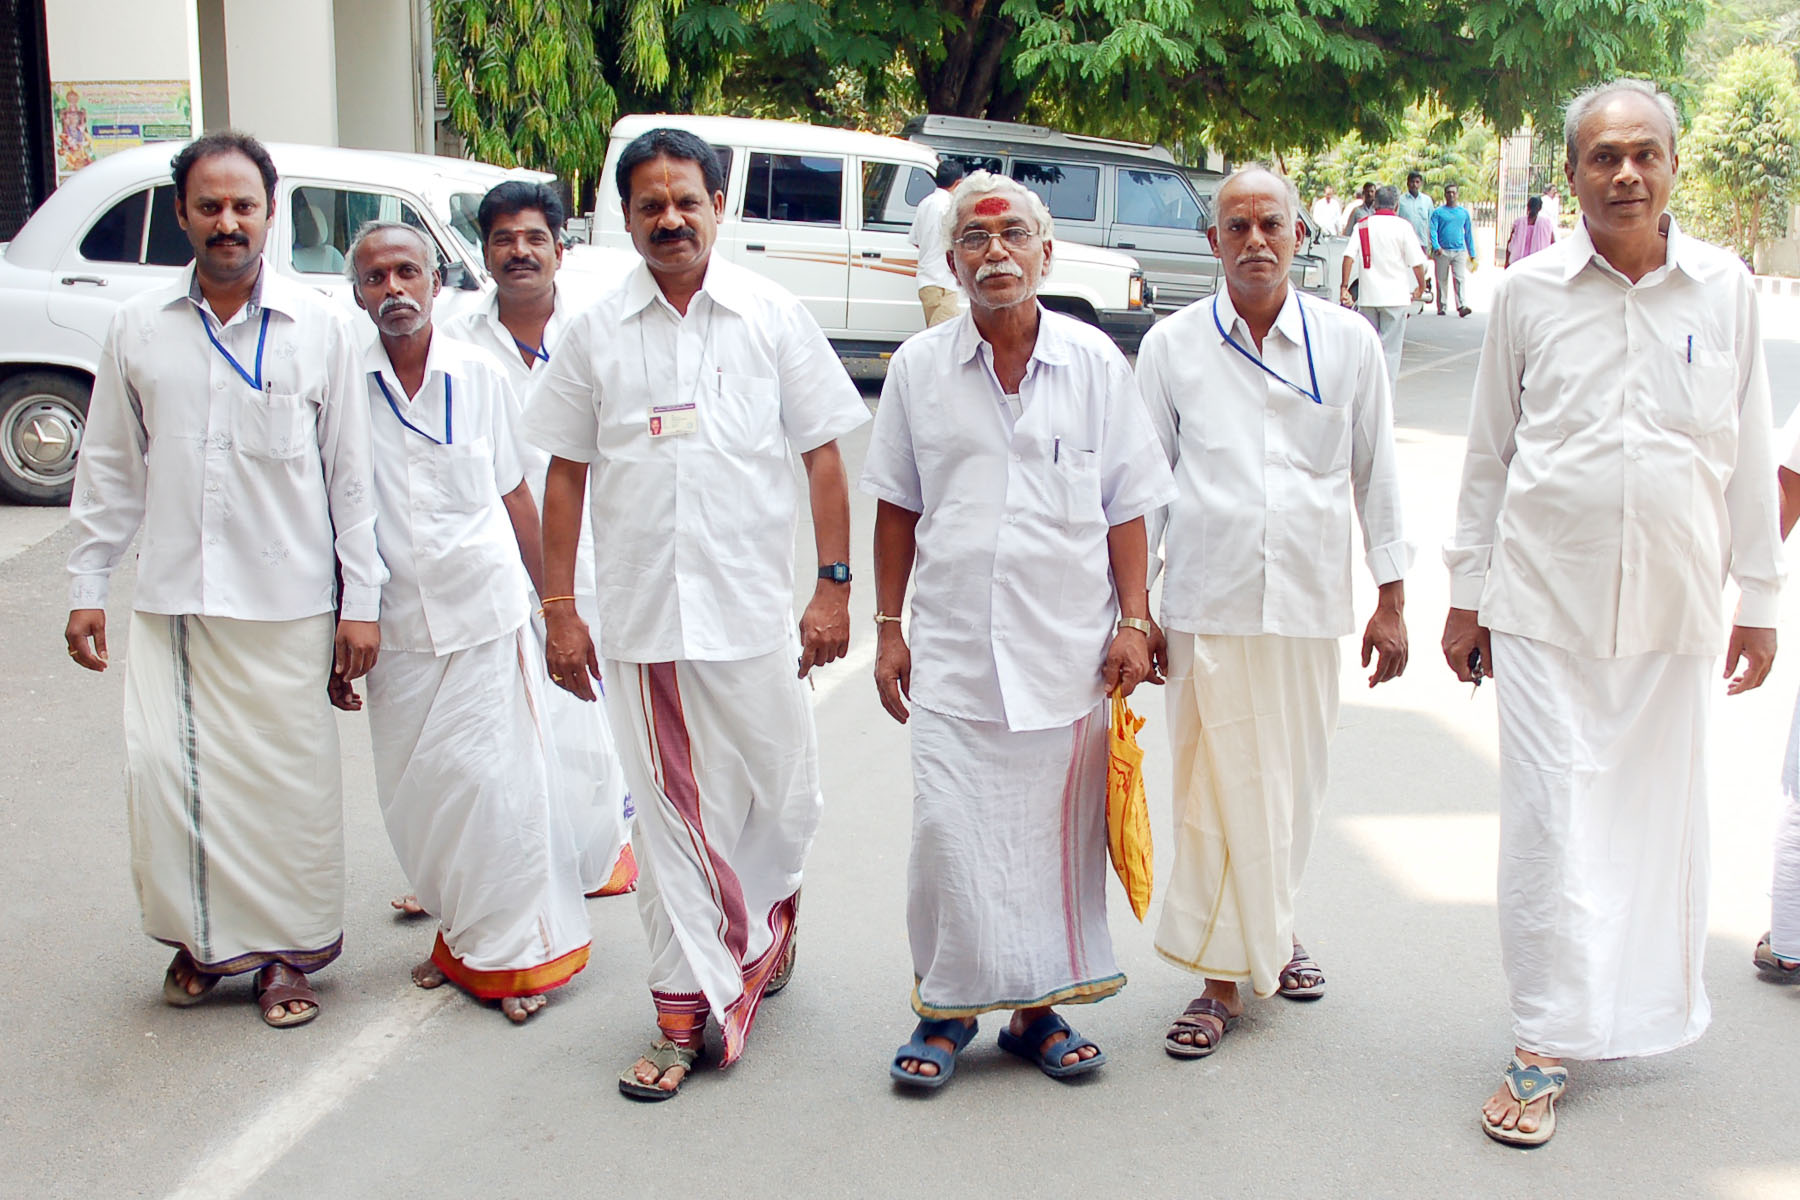 Tirupati temple trust is training SC/ST priests, but won't let them serve  in its own temples